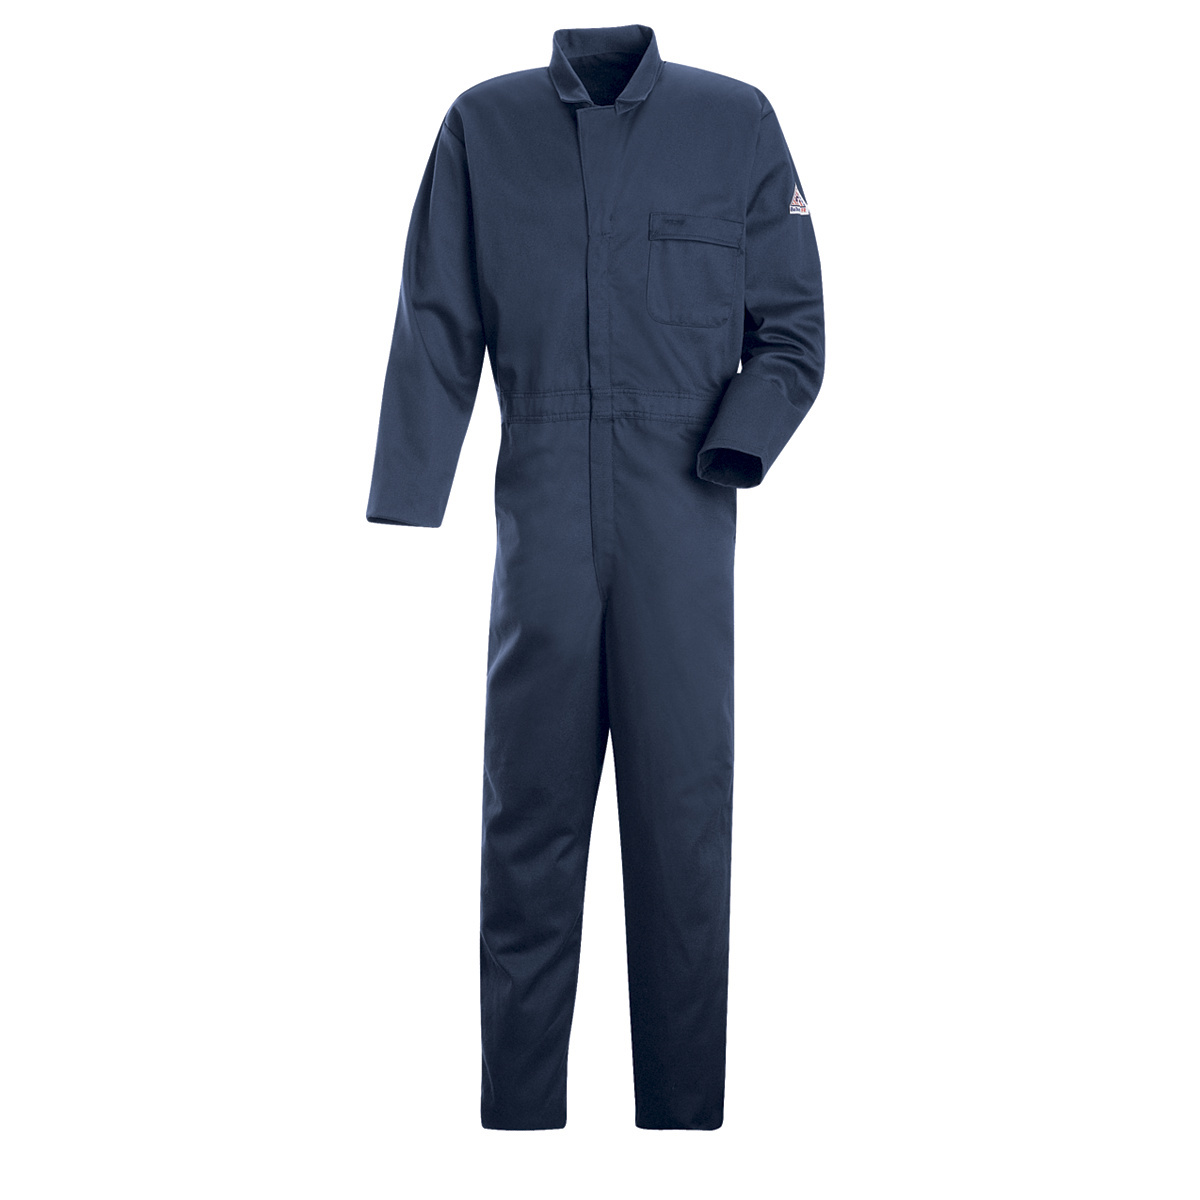 Bulwark® 3X Regular Navy Blue EXCEL FR® Twill Cotton Flame Resistant Coveralls With Zipper Front Closure